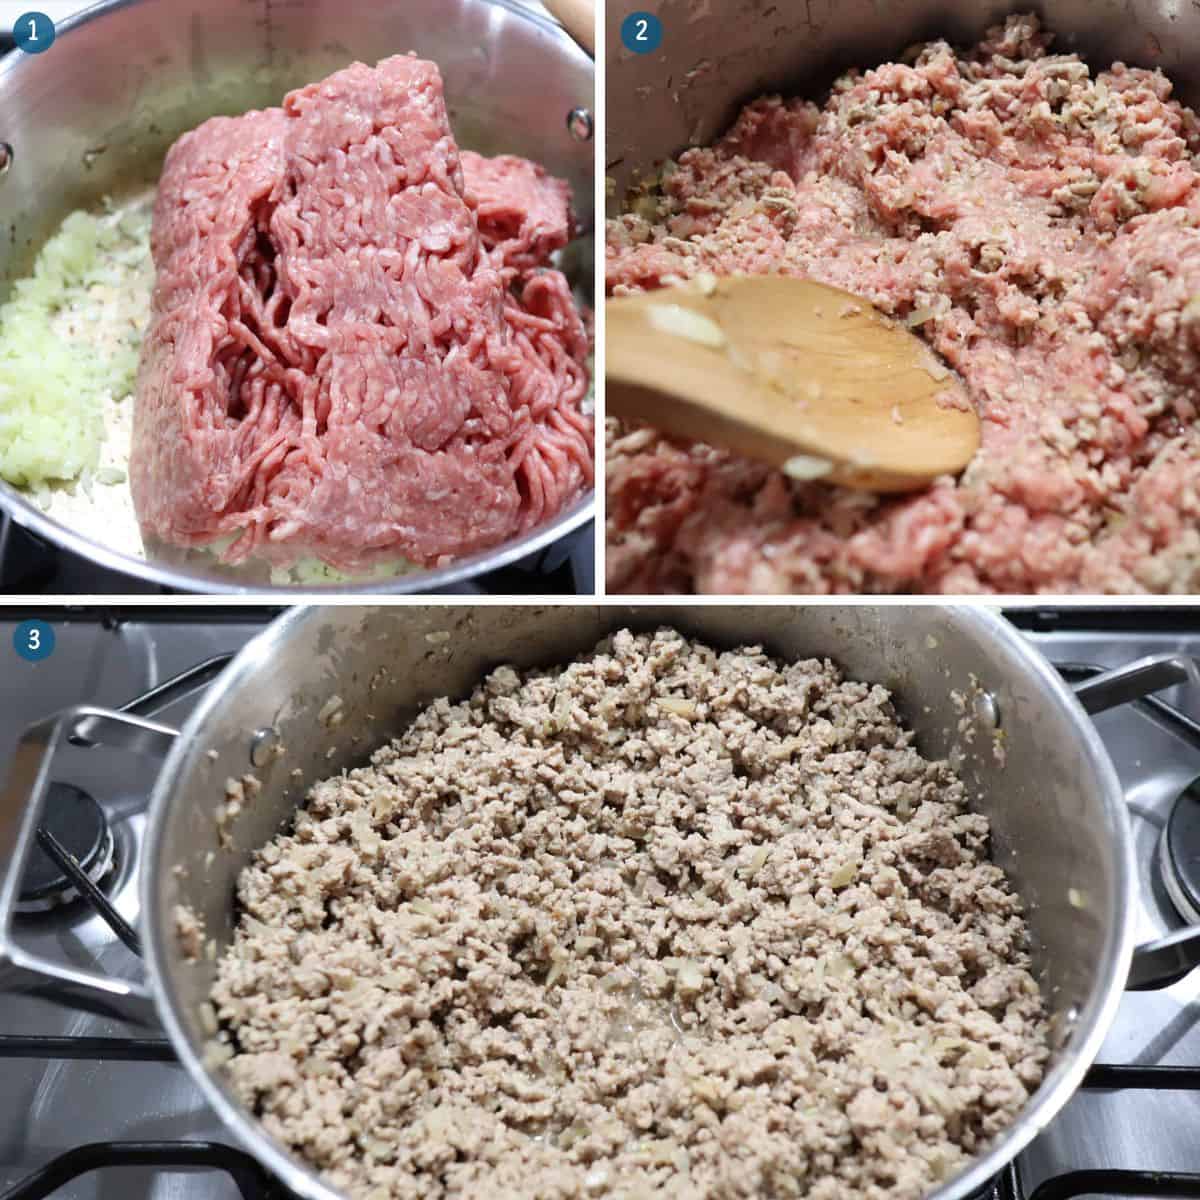 cooking-the-meat-for-spaghetti-bolognese-sauce-with-blackberry-jam